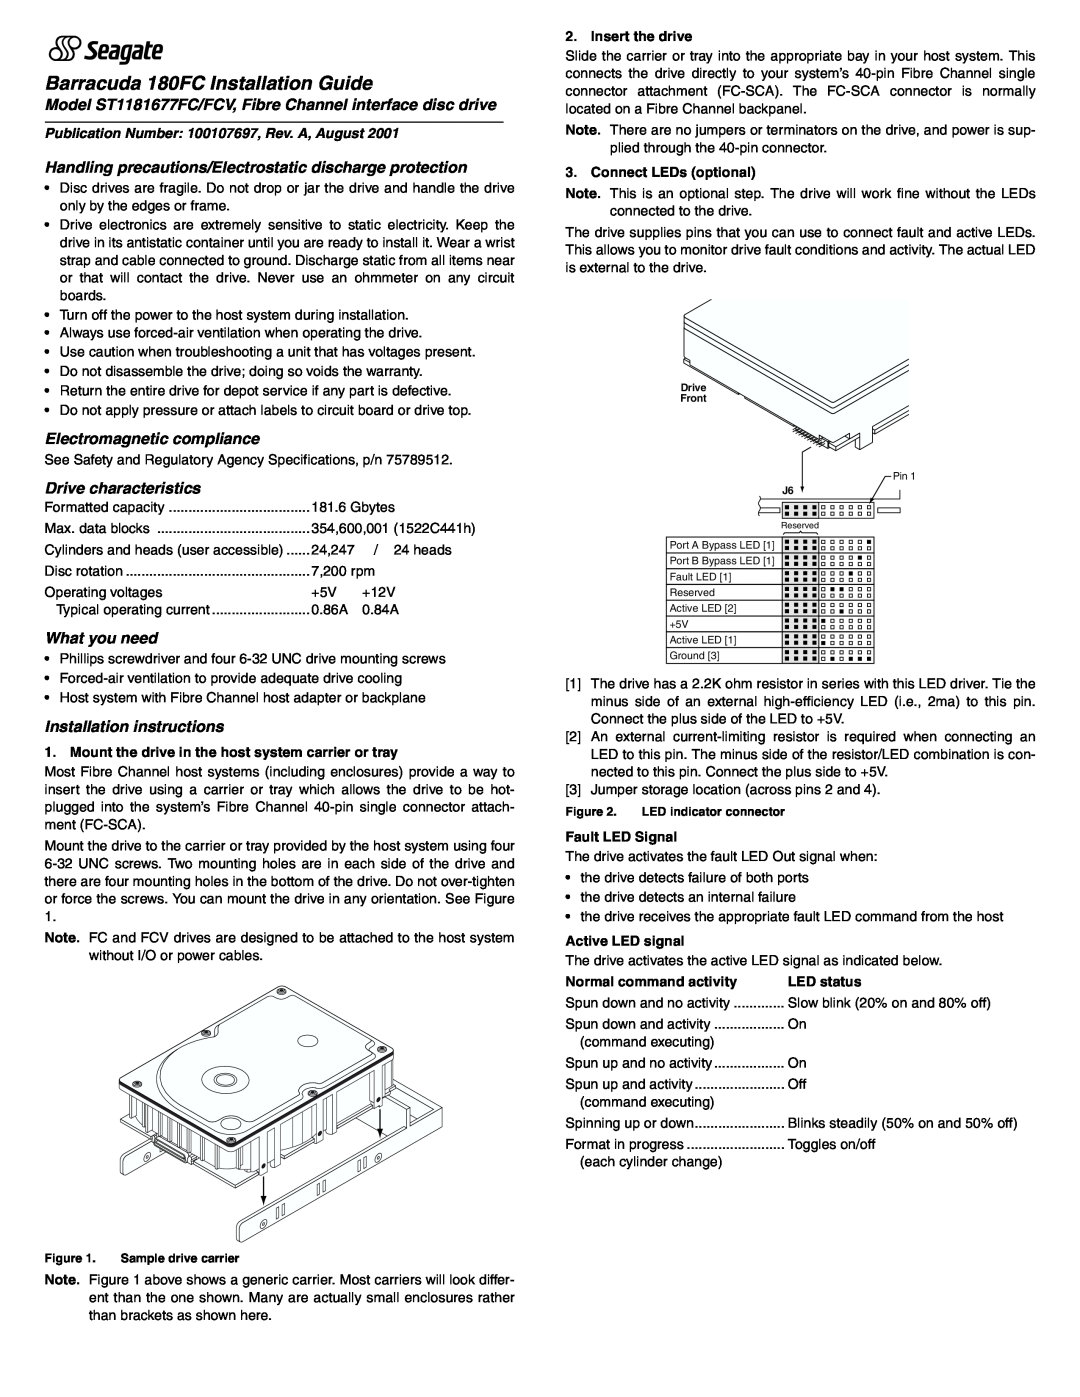 Seagate installation instructions Model ST1181677FC/FCV, Fibre Channel interface disc drive, Electromagnetic compliance 